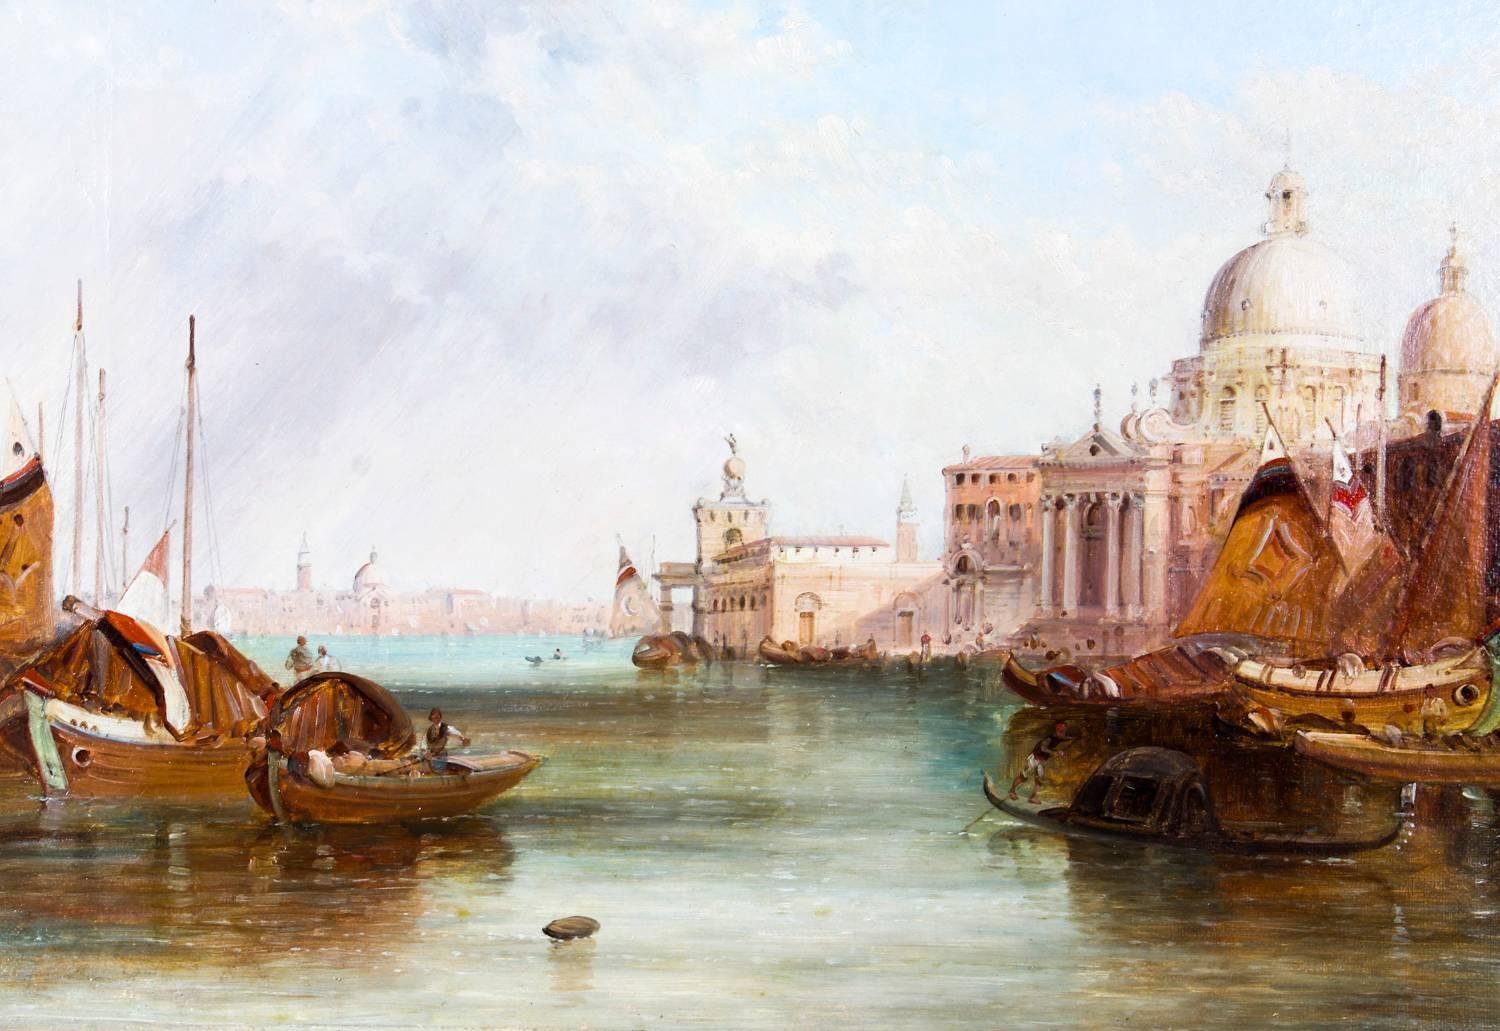 This is a beautiful oil on canvas painting of the view of the Santa Maria dell Salute in Venice by the renowned British artist Alfred Pollentine (1836-1890) and signed lower right 'A Pollentine/86'.

This beautiful landscape captures a striking